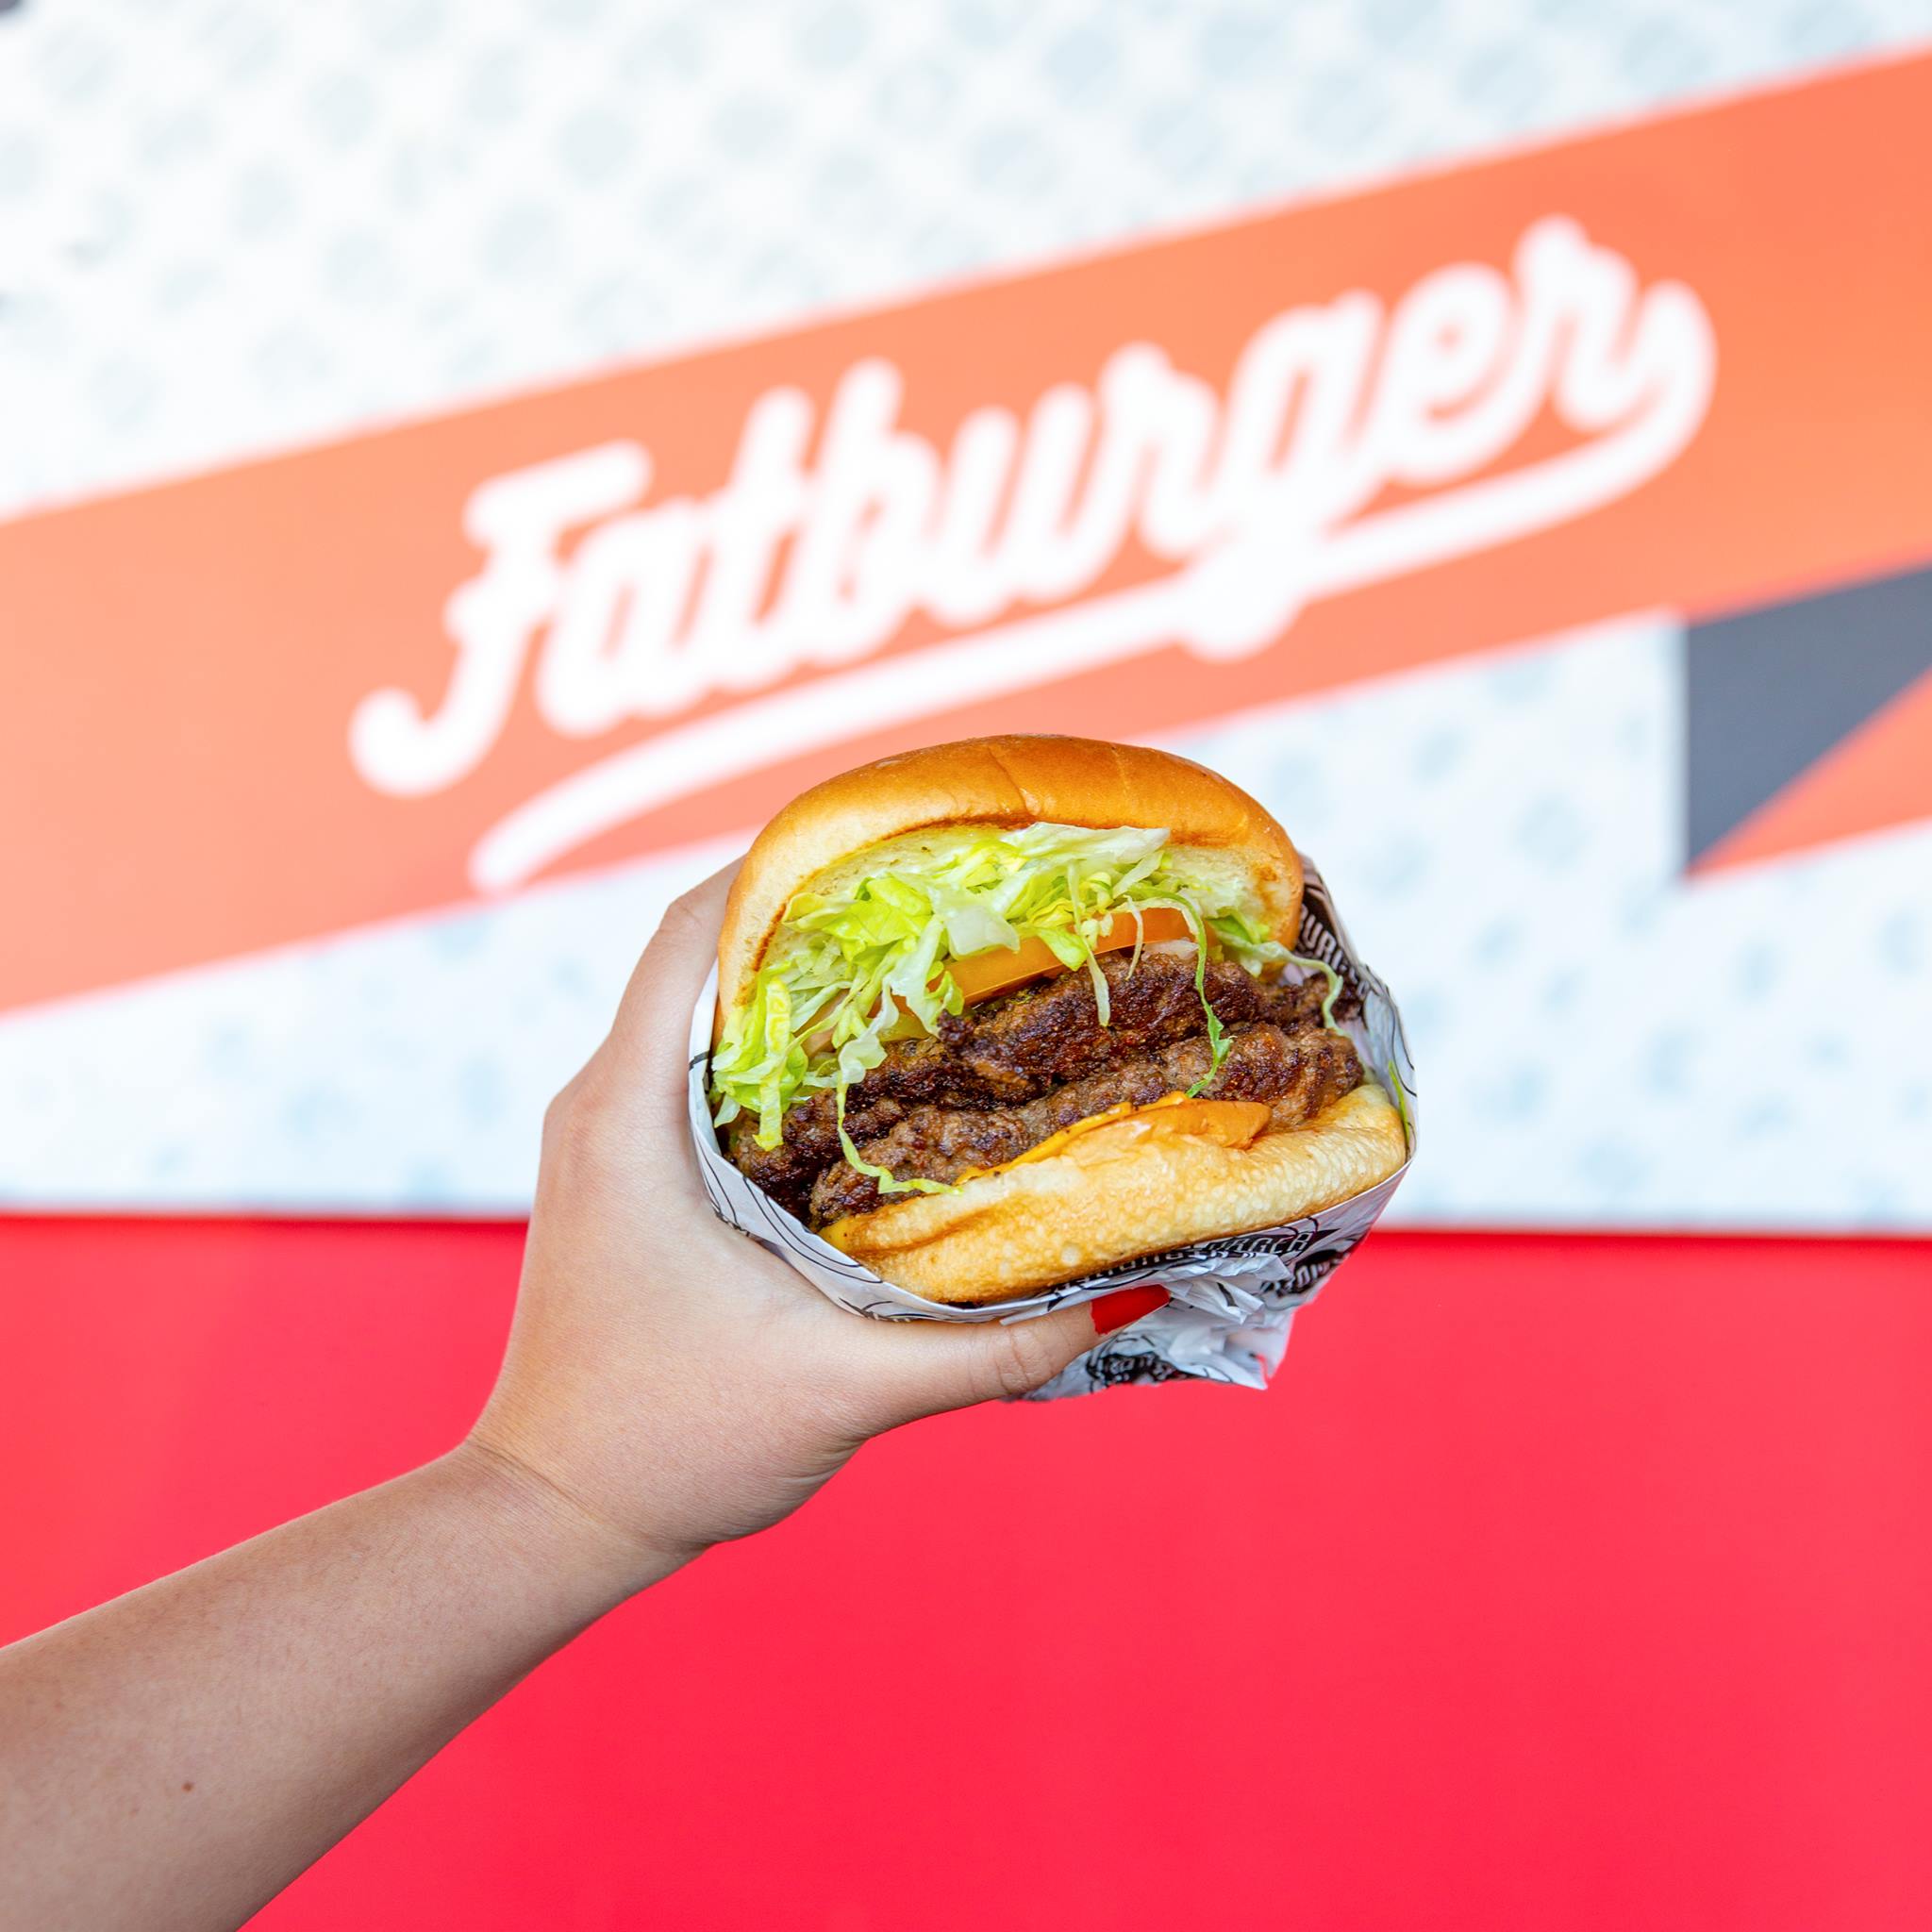 A hand holding up a semi-wrapped burger with shredded lettuce, a tomato slice, two patties, and cheese in front of a Fatburger sign